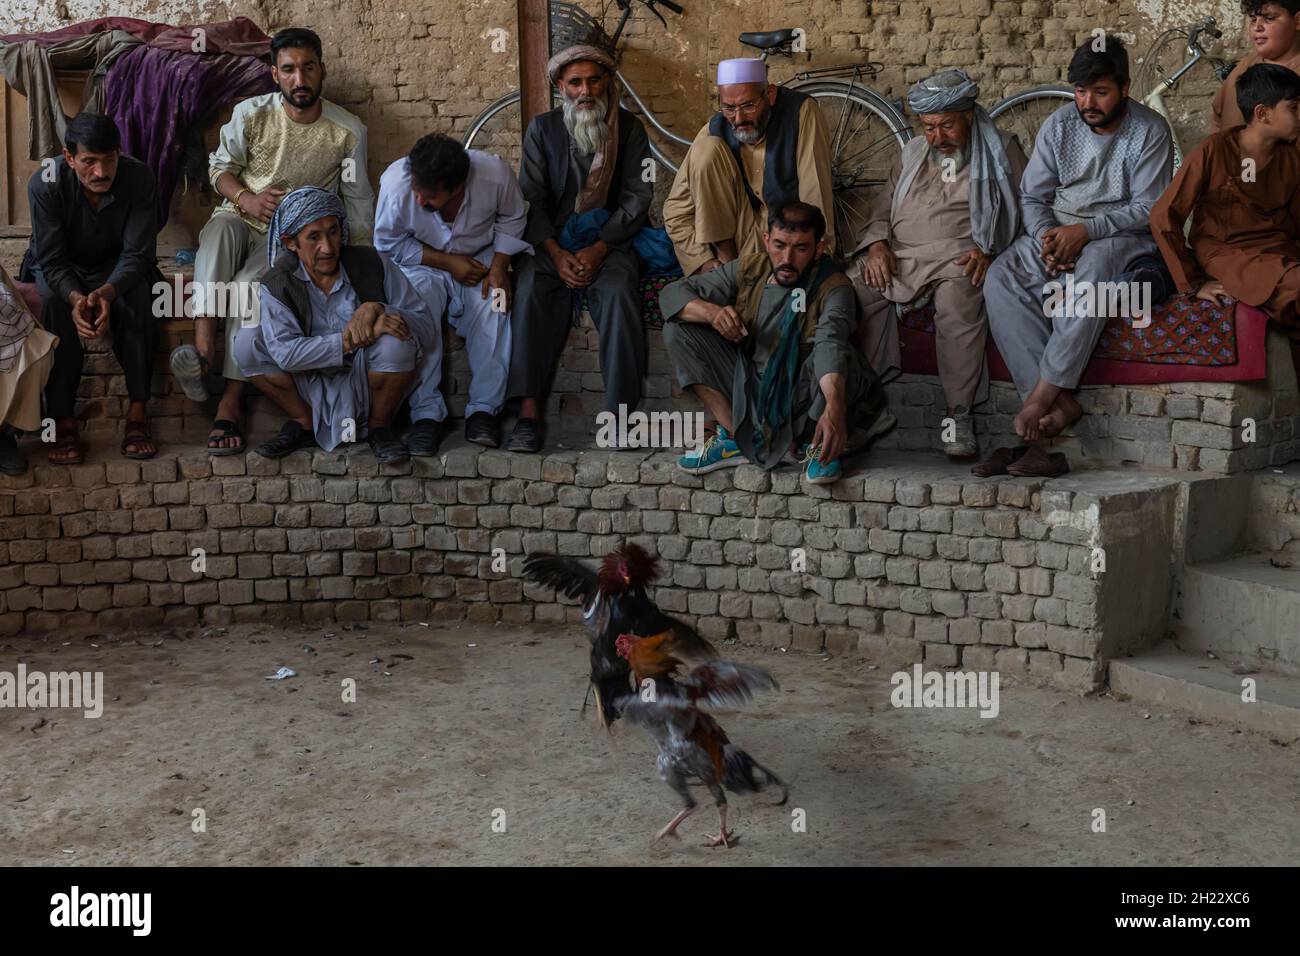 Traditional cockfight in Mazar-E-Sharif, Afghanistan Stock Photo